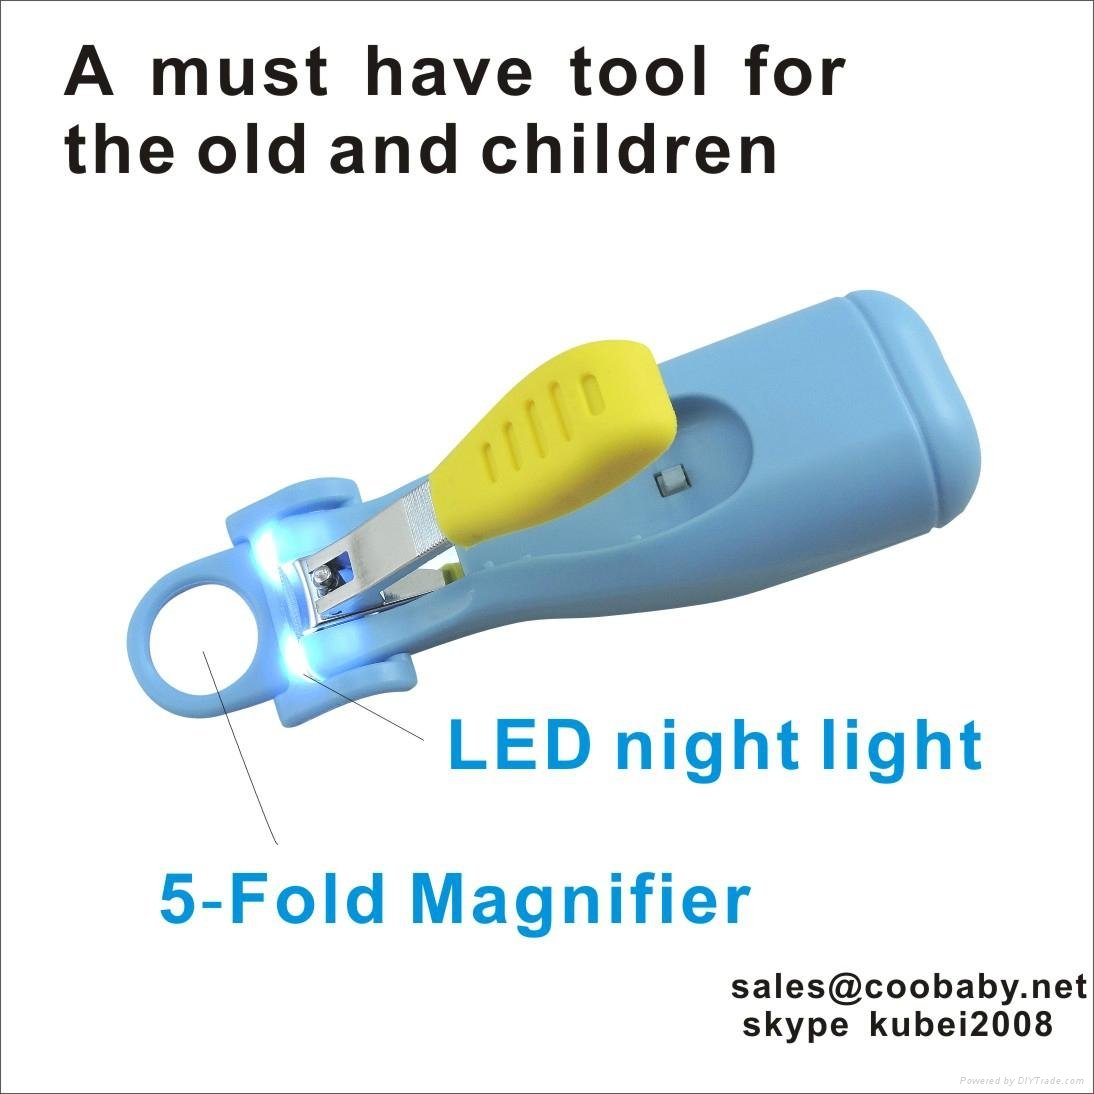 LED night light baby nail clipper with 5-fold magnifier